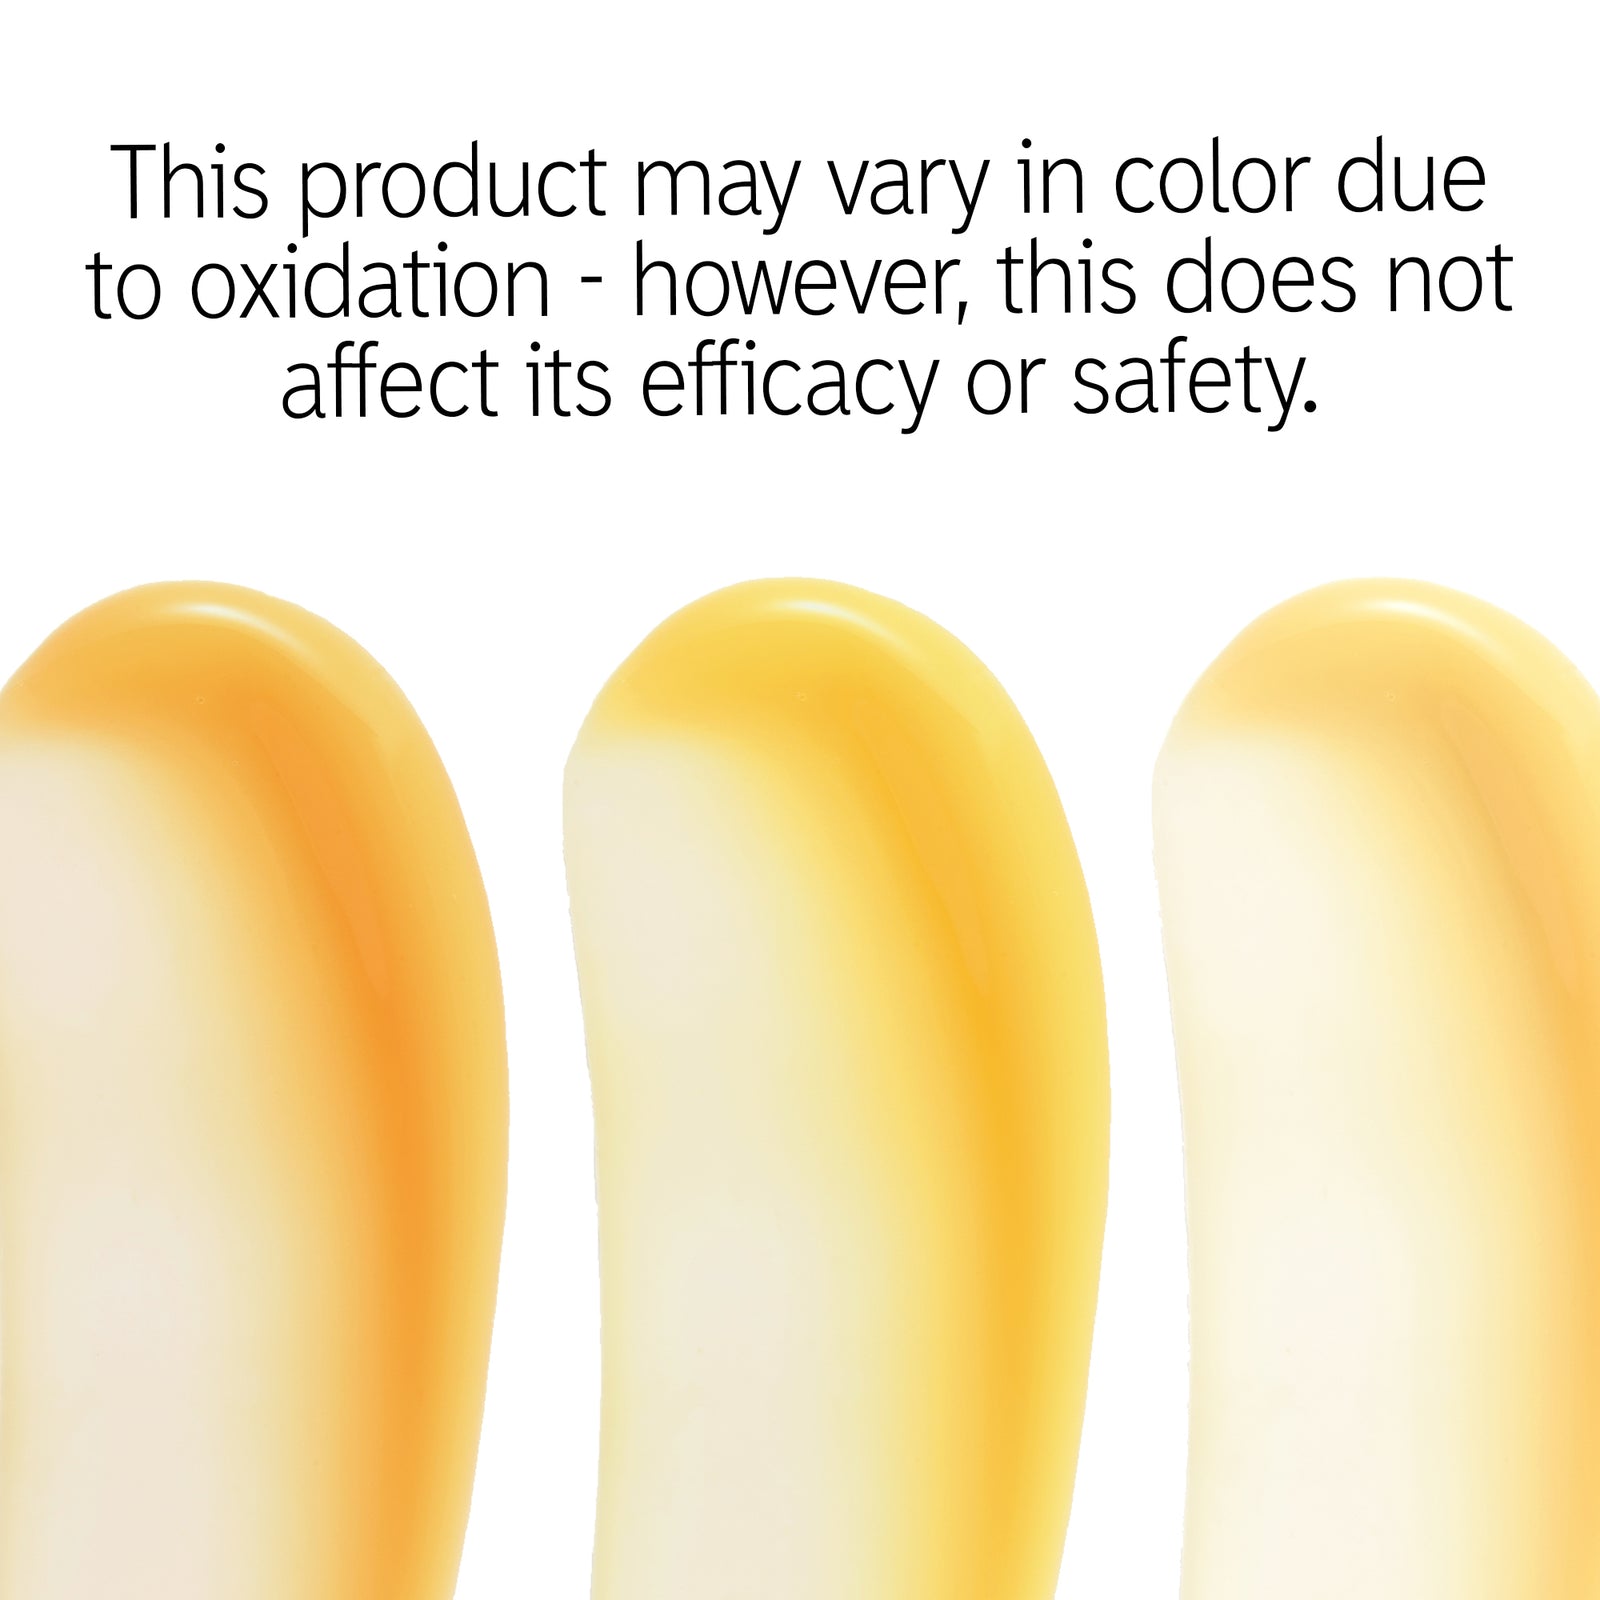 Goop shots that reads 'This product may vary in color due to oxidation - however, this does not affect its efficacy or safety